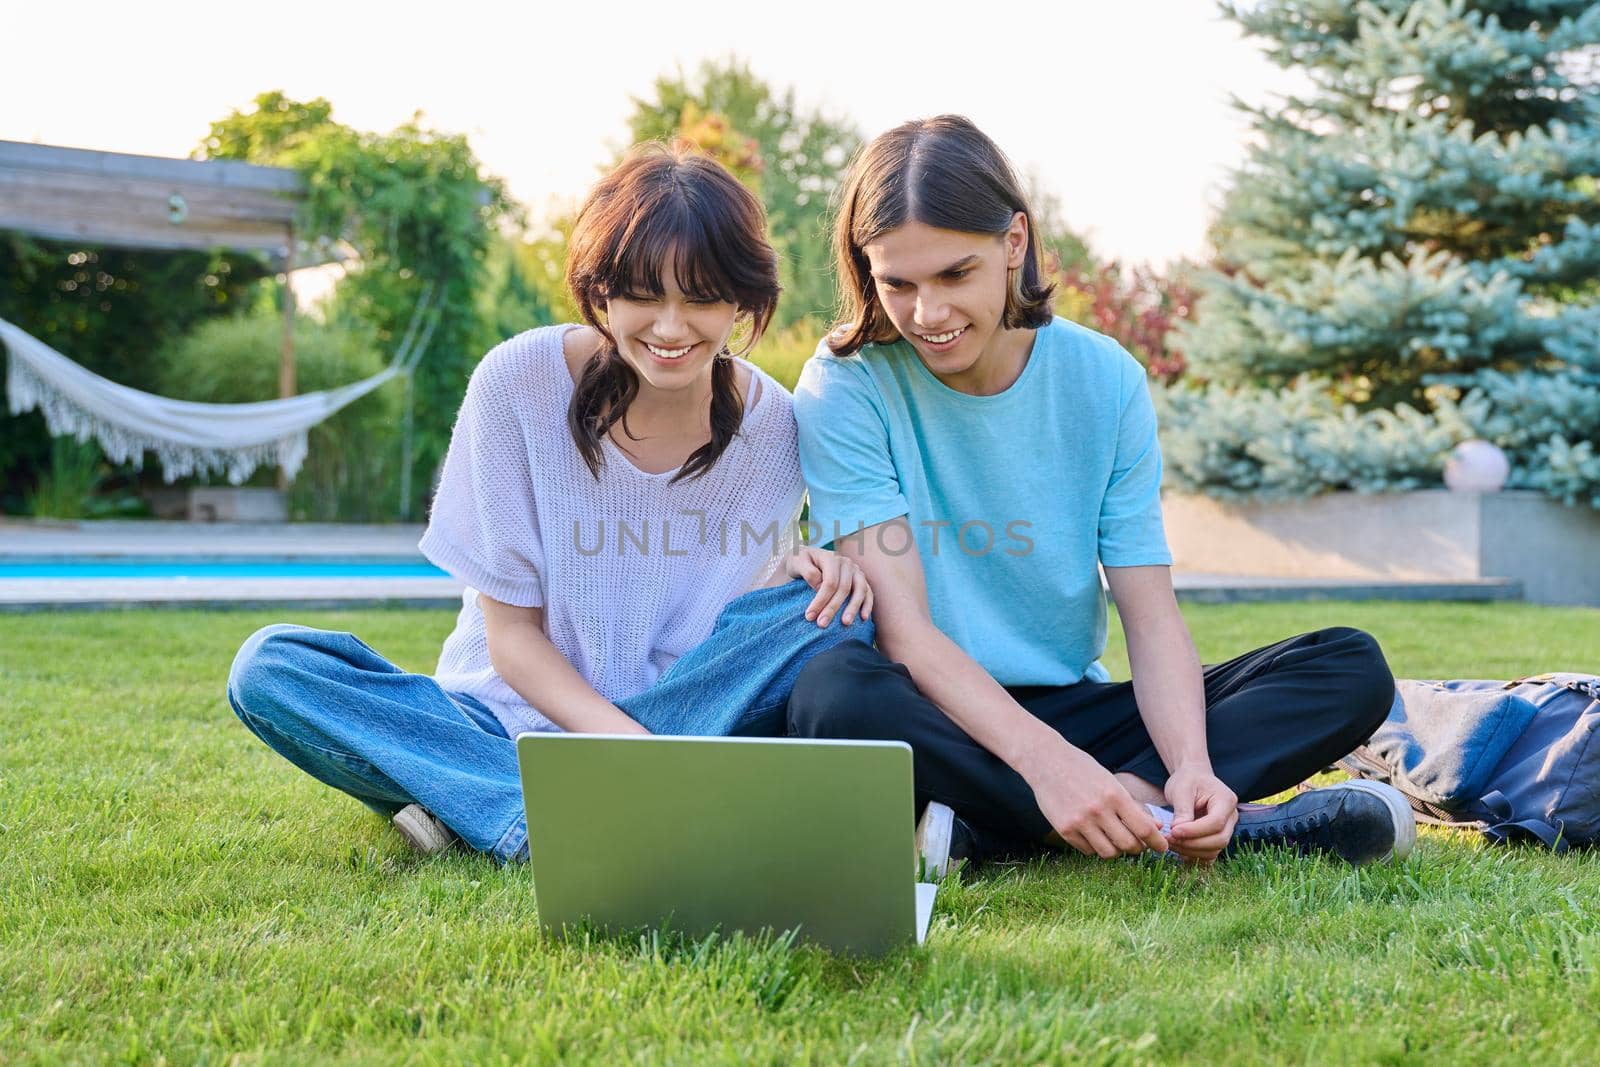 Two teenage friends of students sitting on grass with laptop, in backyard, guy and girl 18 years old study together. Friendship, youth, technology, high school, college, lifestyle concept